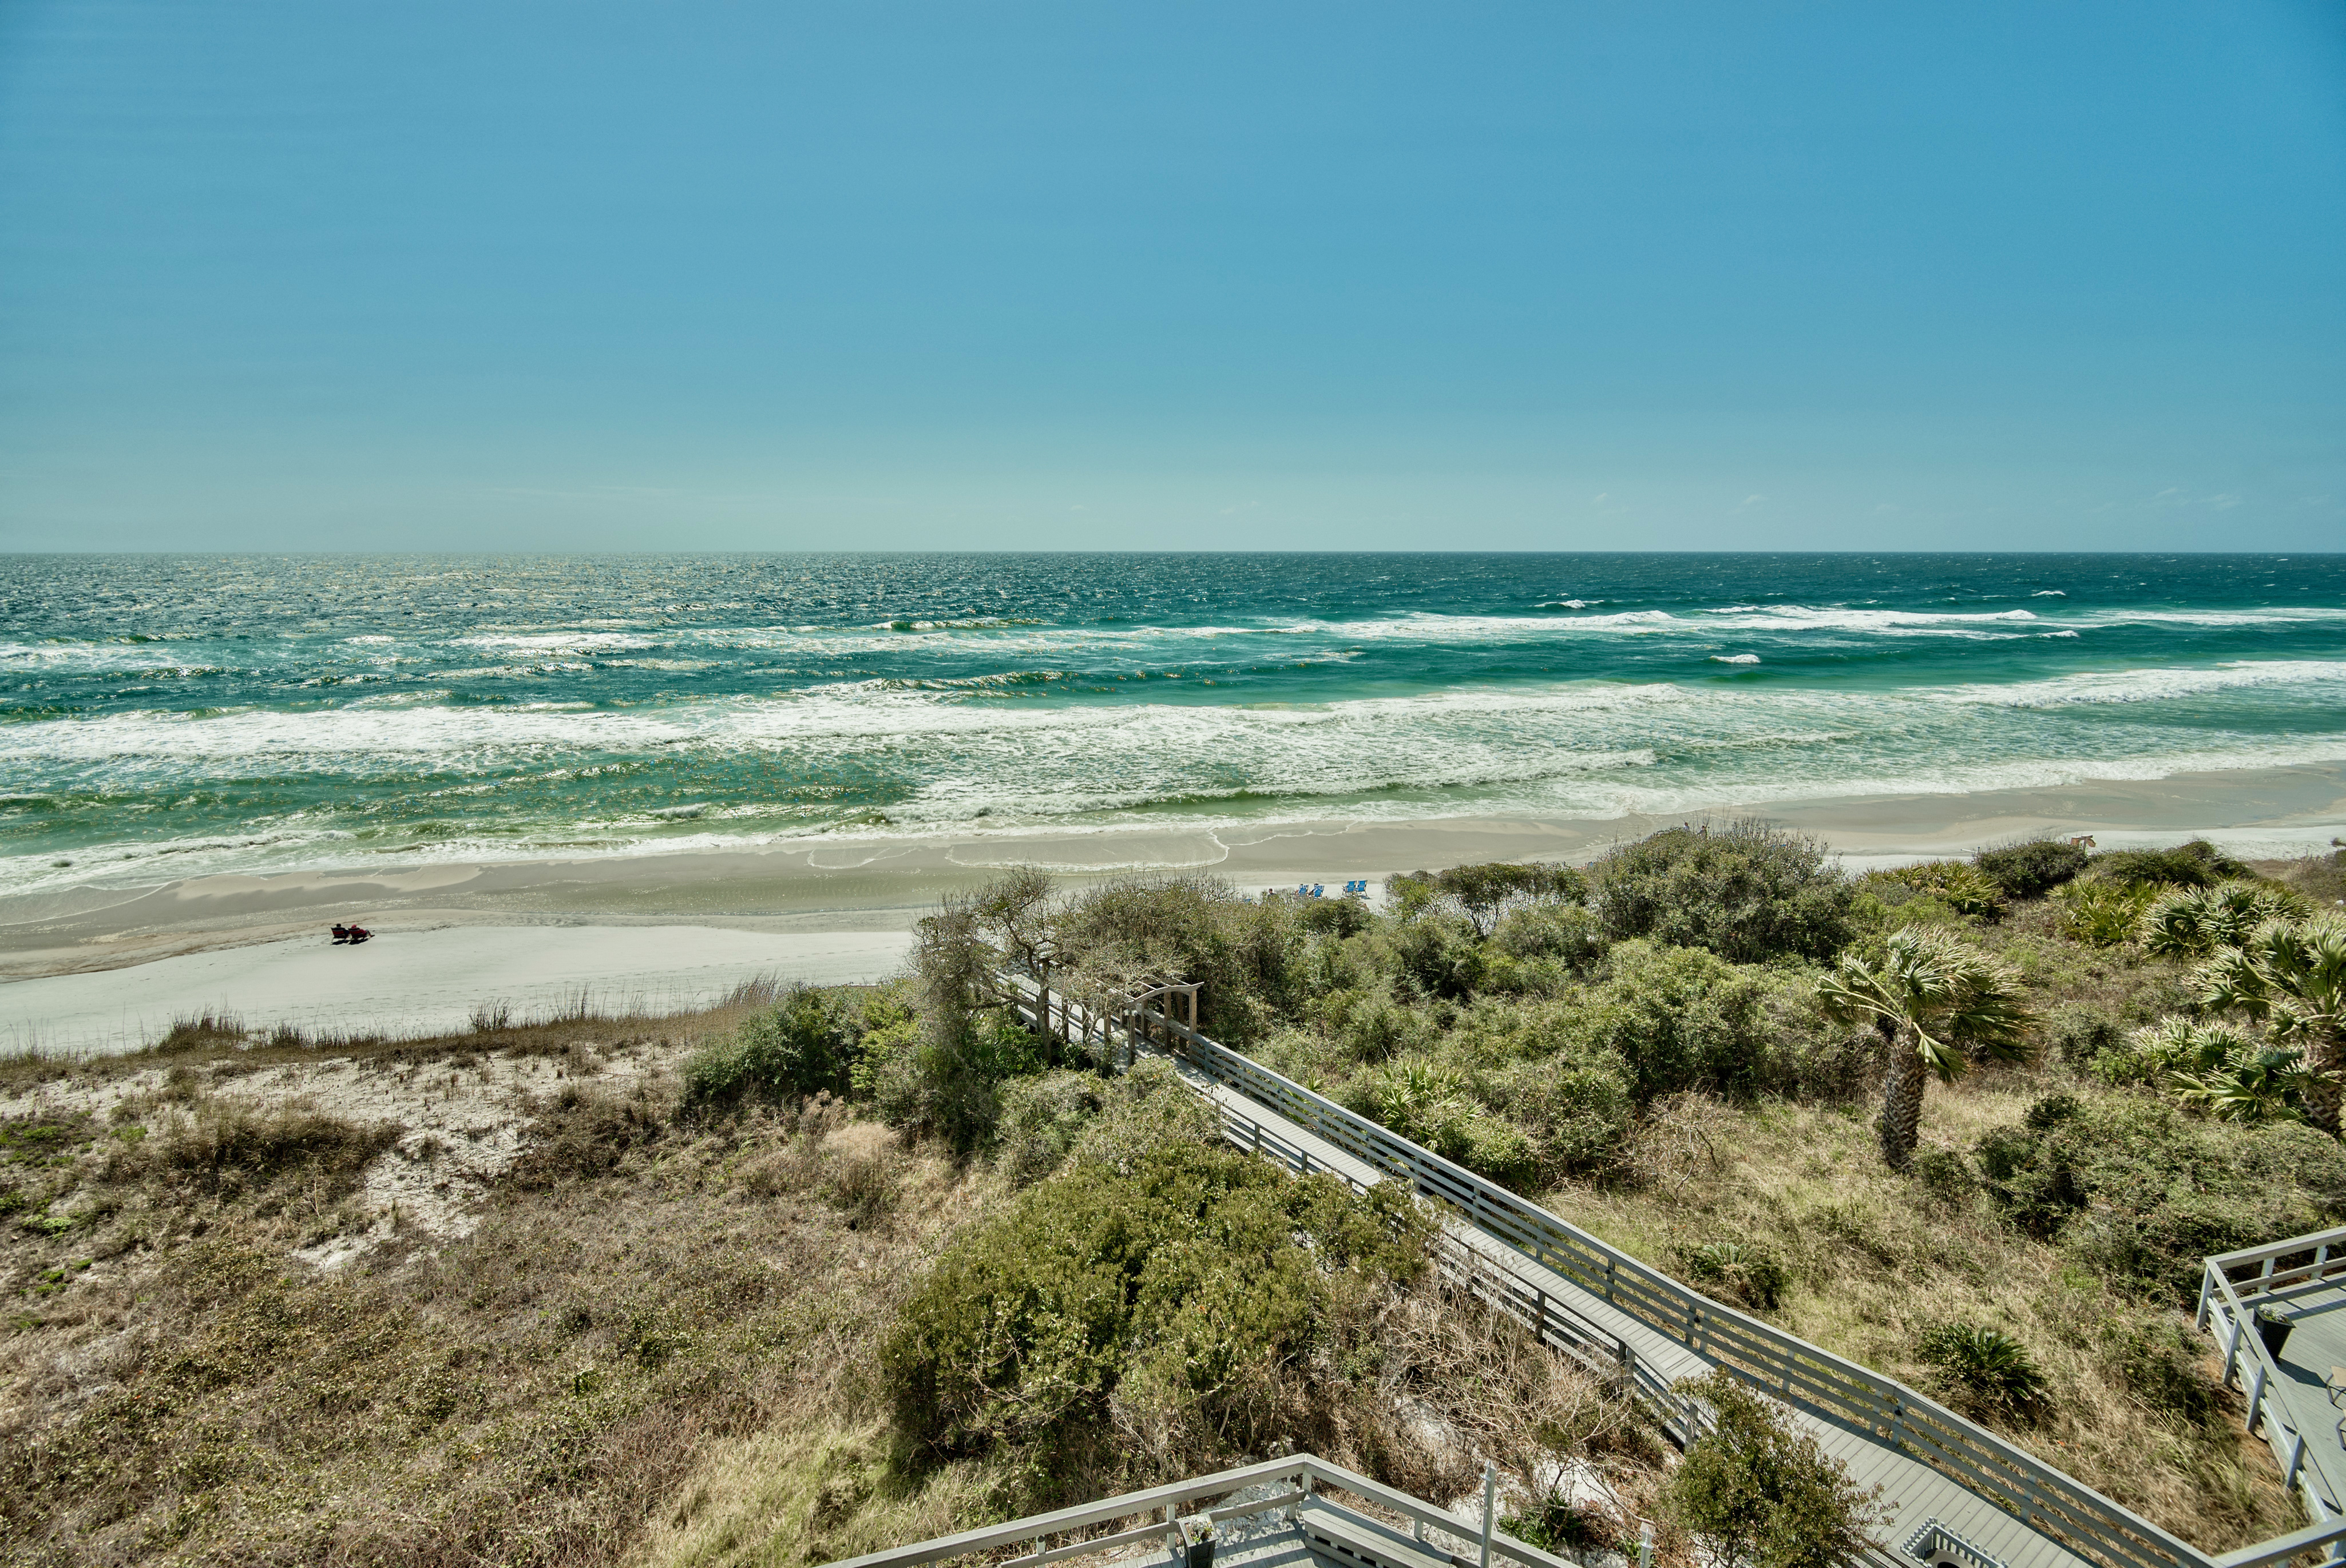 The boardwalk to the beach surrounded by native vegetation at One Seagrove Place with the gulf in the background